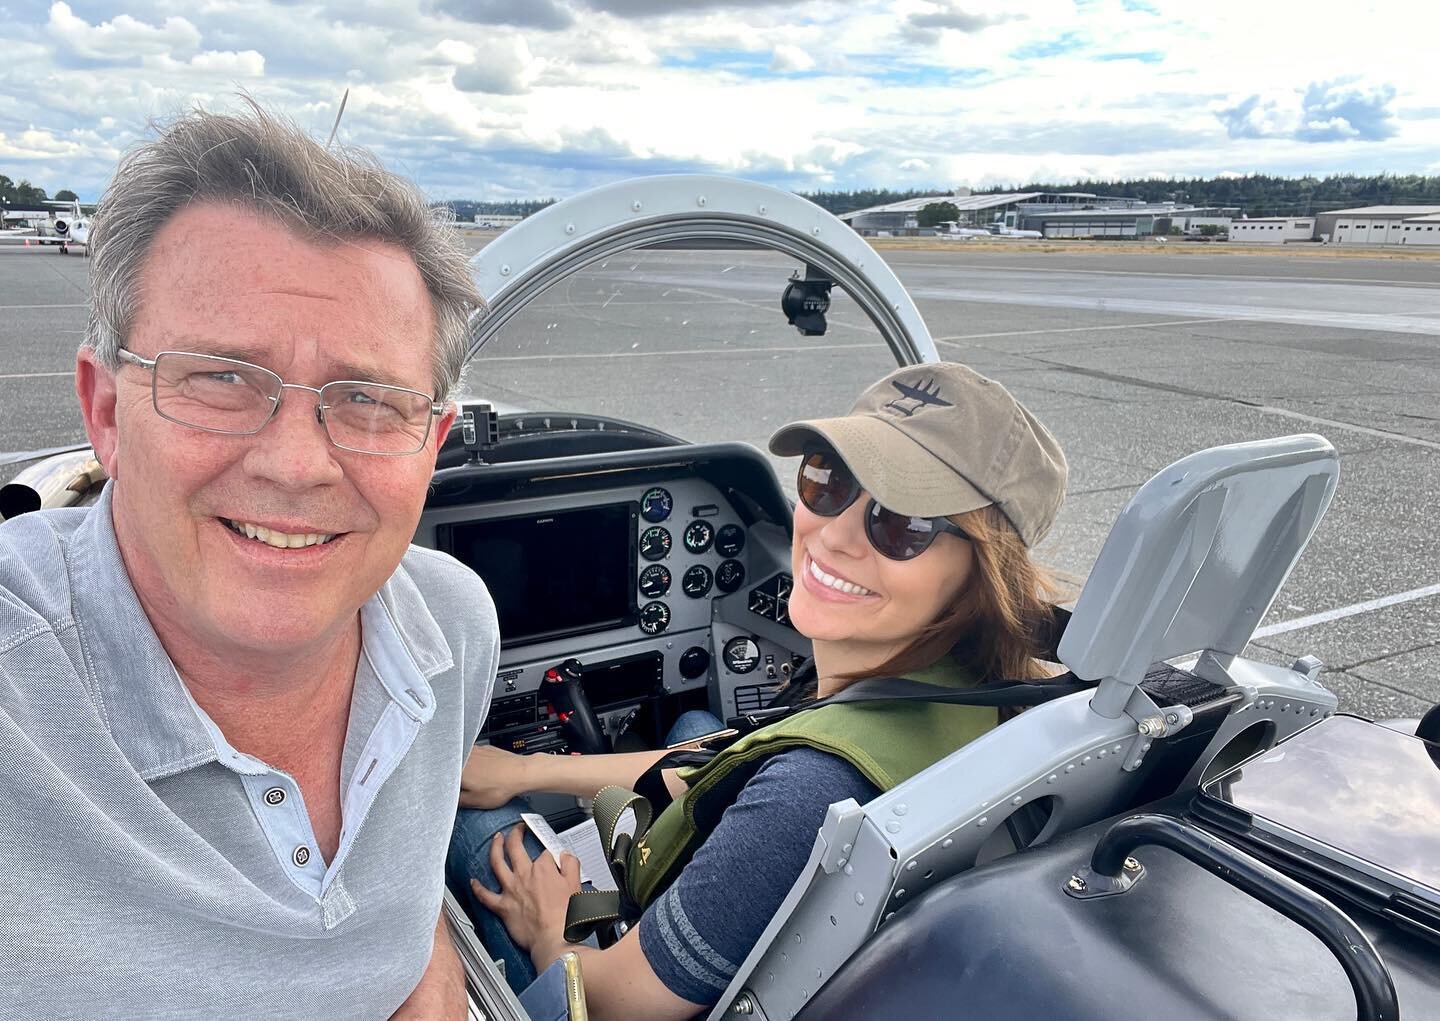 Fun factor fifty plus flying the 750hp Pilatus PC-7 with Captain Hanne&hellip;.This plane is kid in the candy store stuff. Bring on the G&rsquo;s. #flying #flight  #flighttraining #flightschool #pilatus #flights